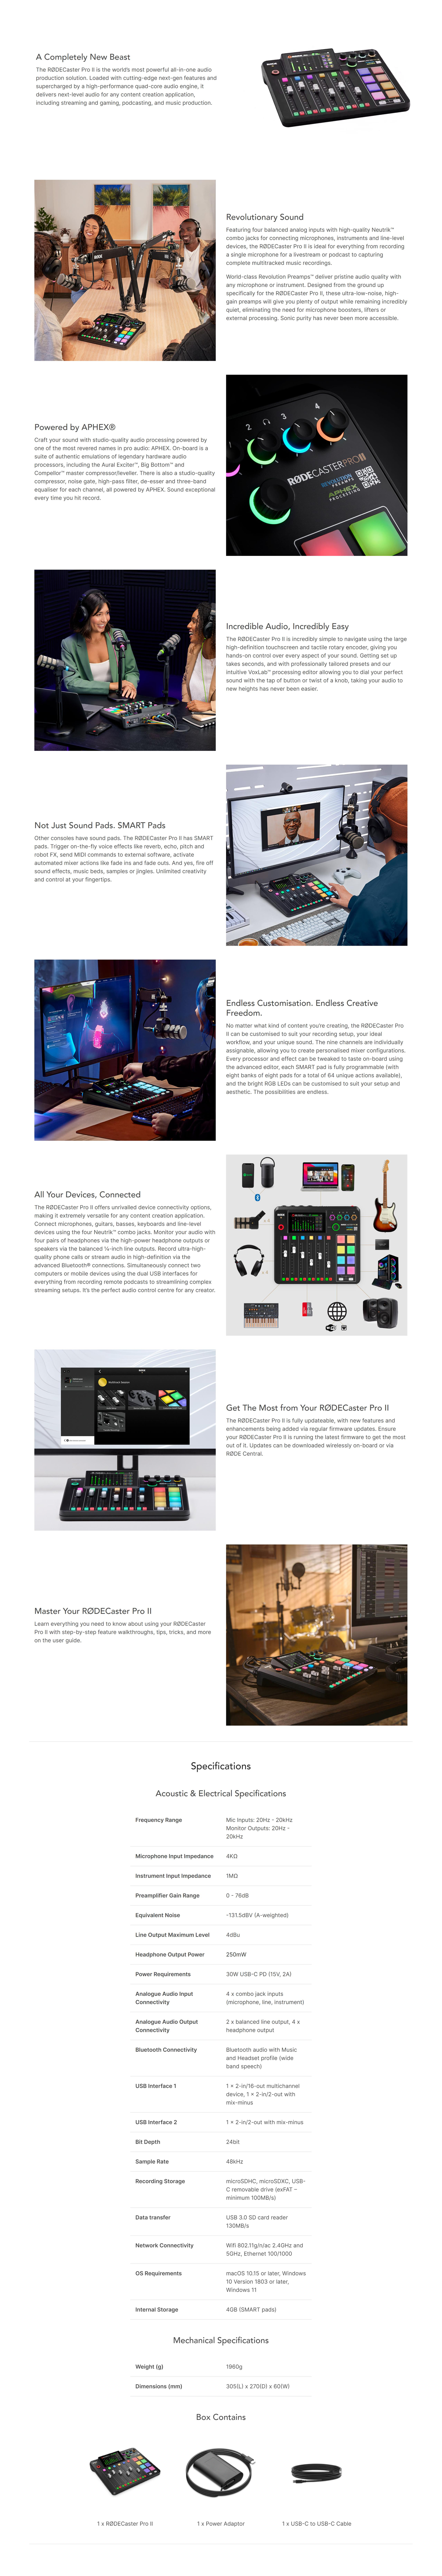 A large marketing image providing additional information about the product RØDE RØDECaster Pro II - Integrated Audio Production Studio (Black) - Additional alt info not provided